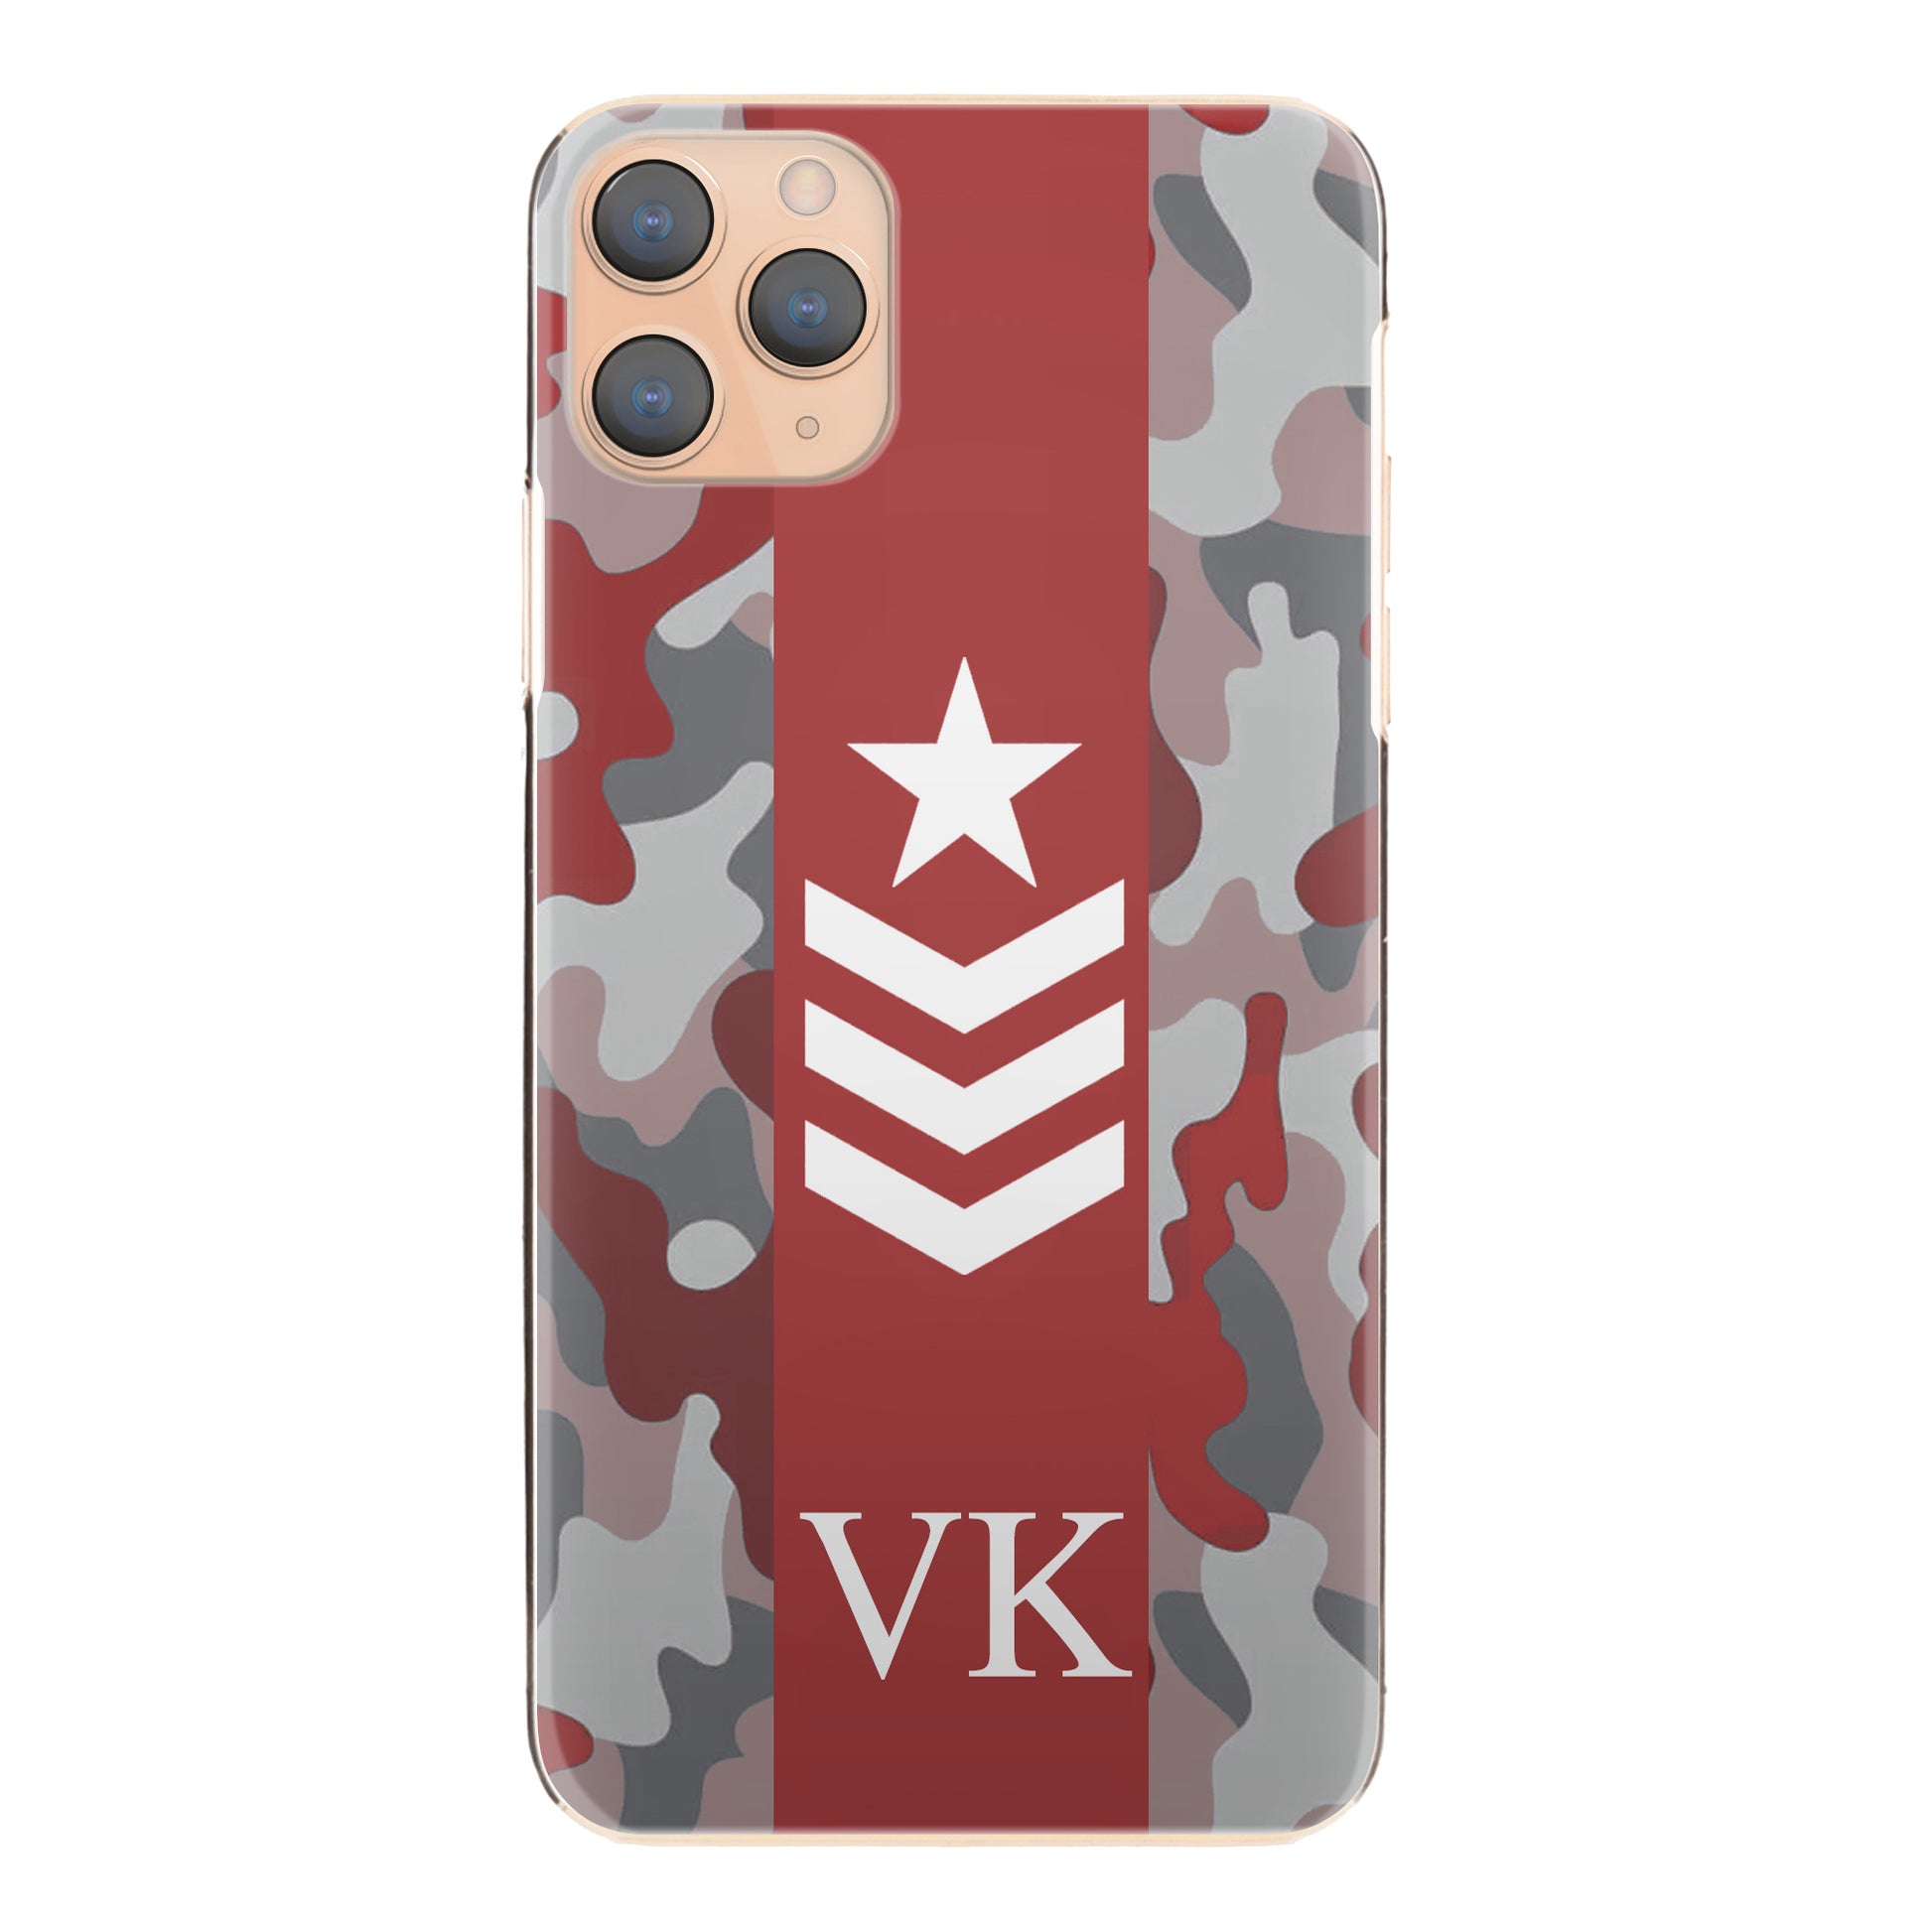 Personalised Xiaomi Phone Hard Case with Initials and Army Rank on Red Camo